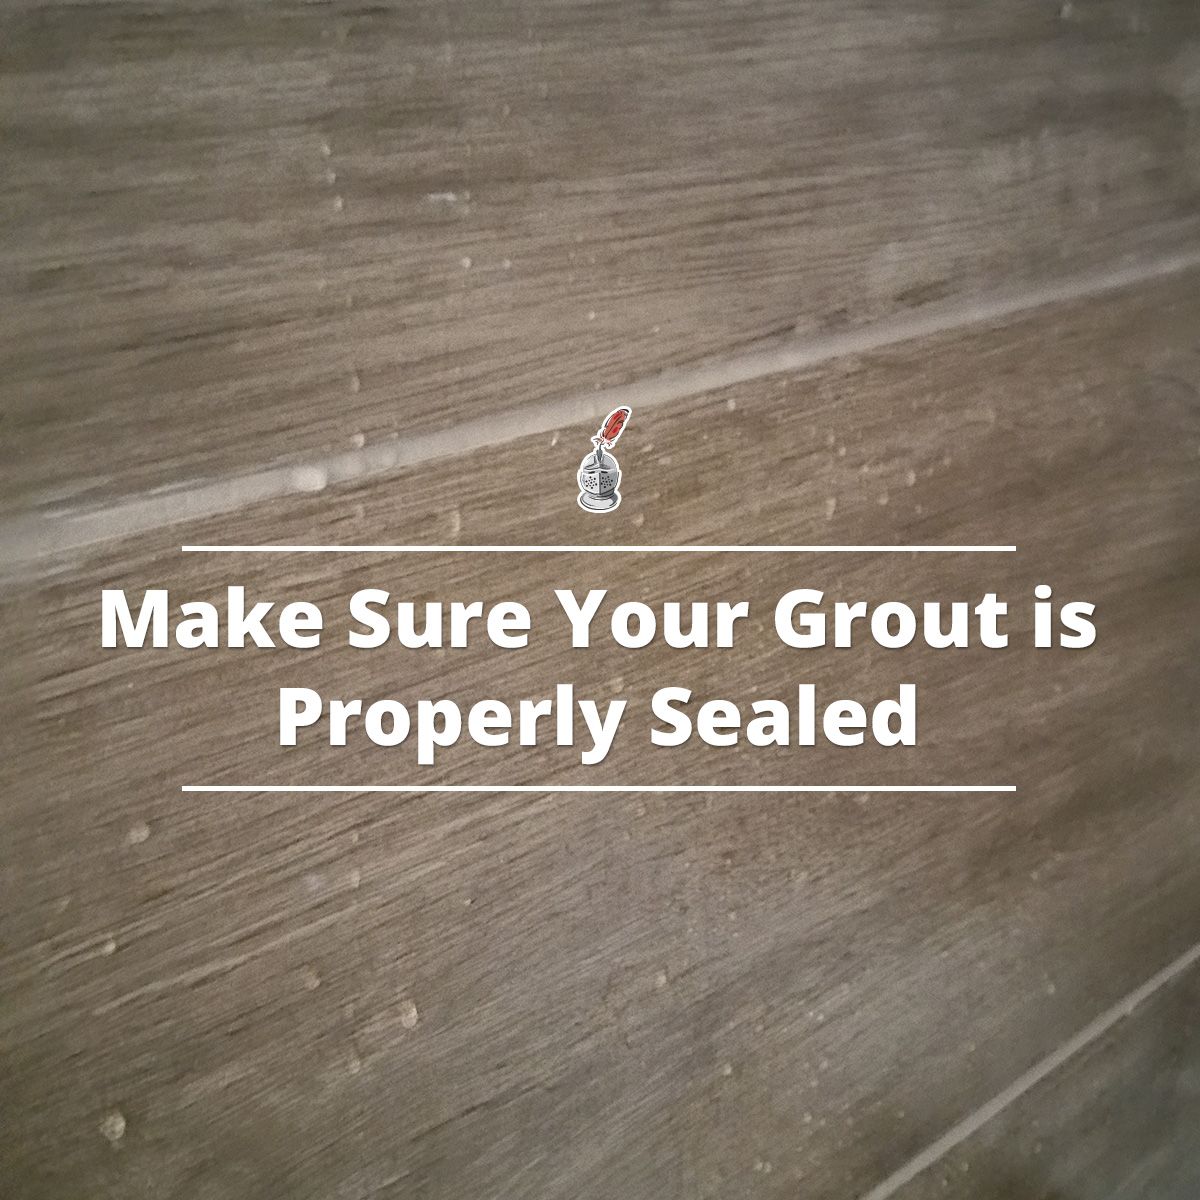 Make Sure Your Grout is Properly Sealed